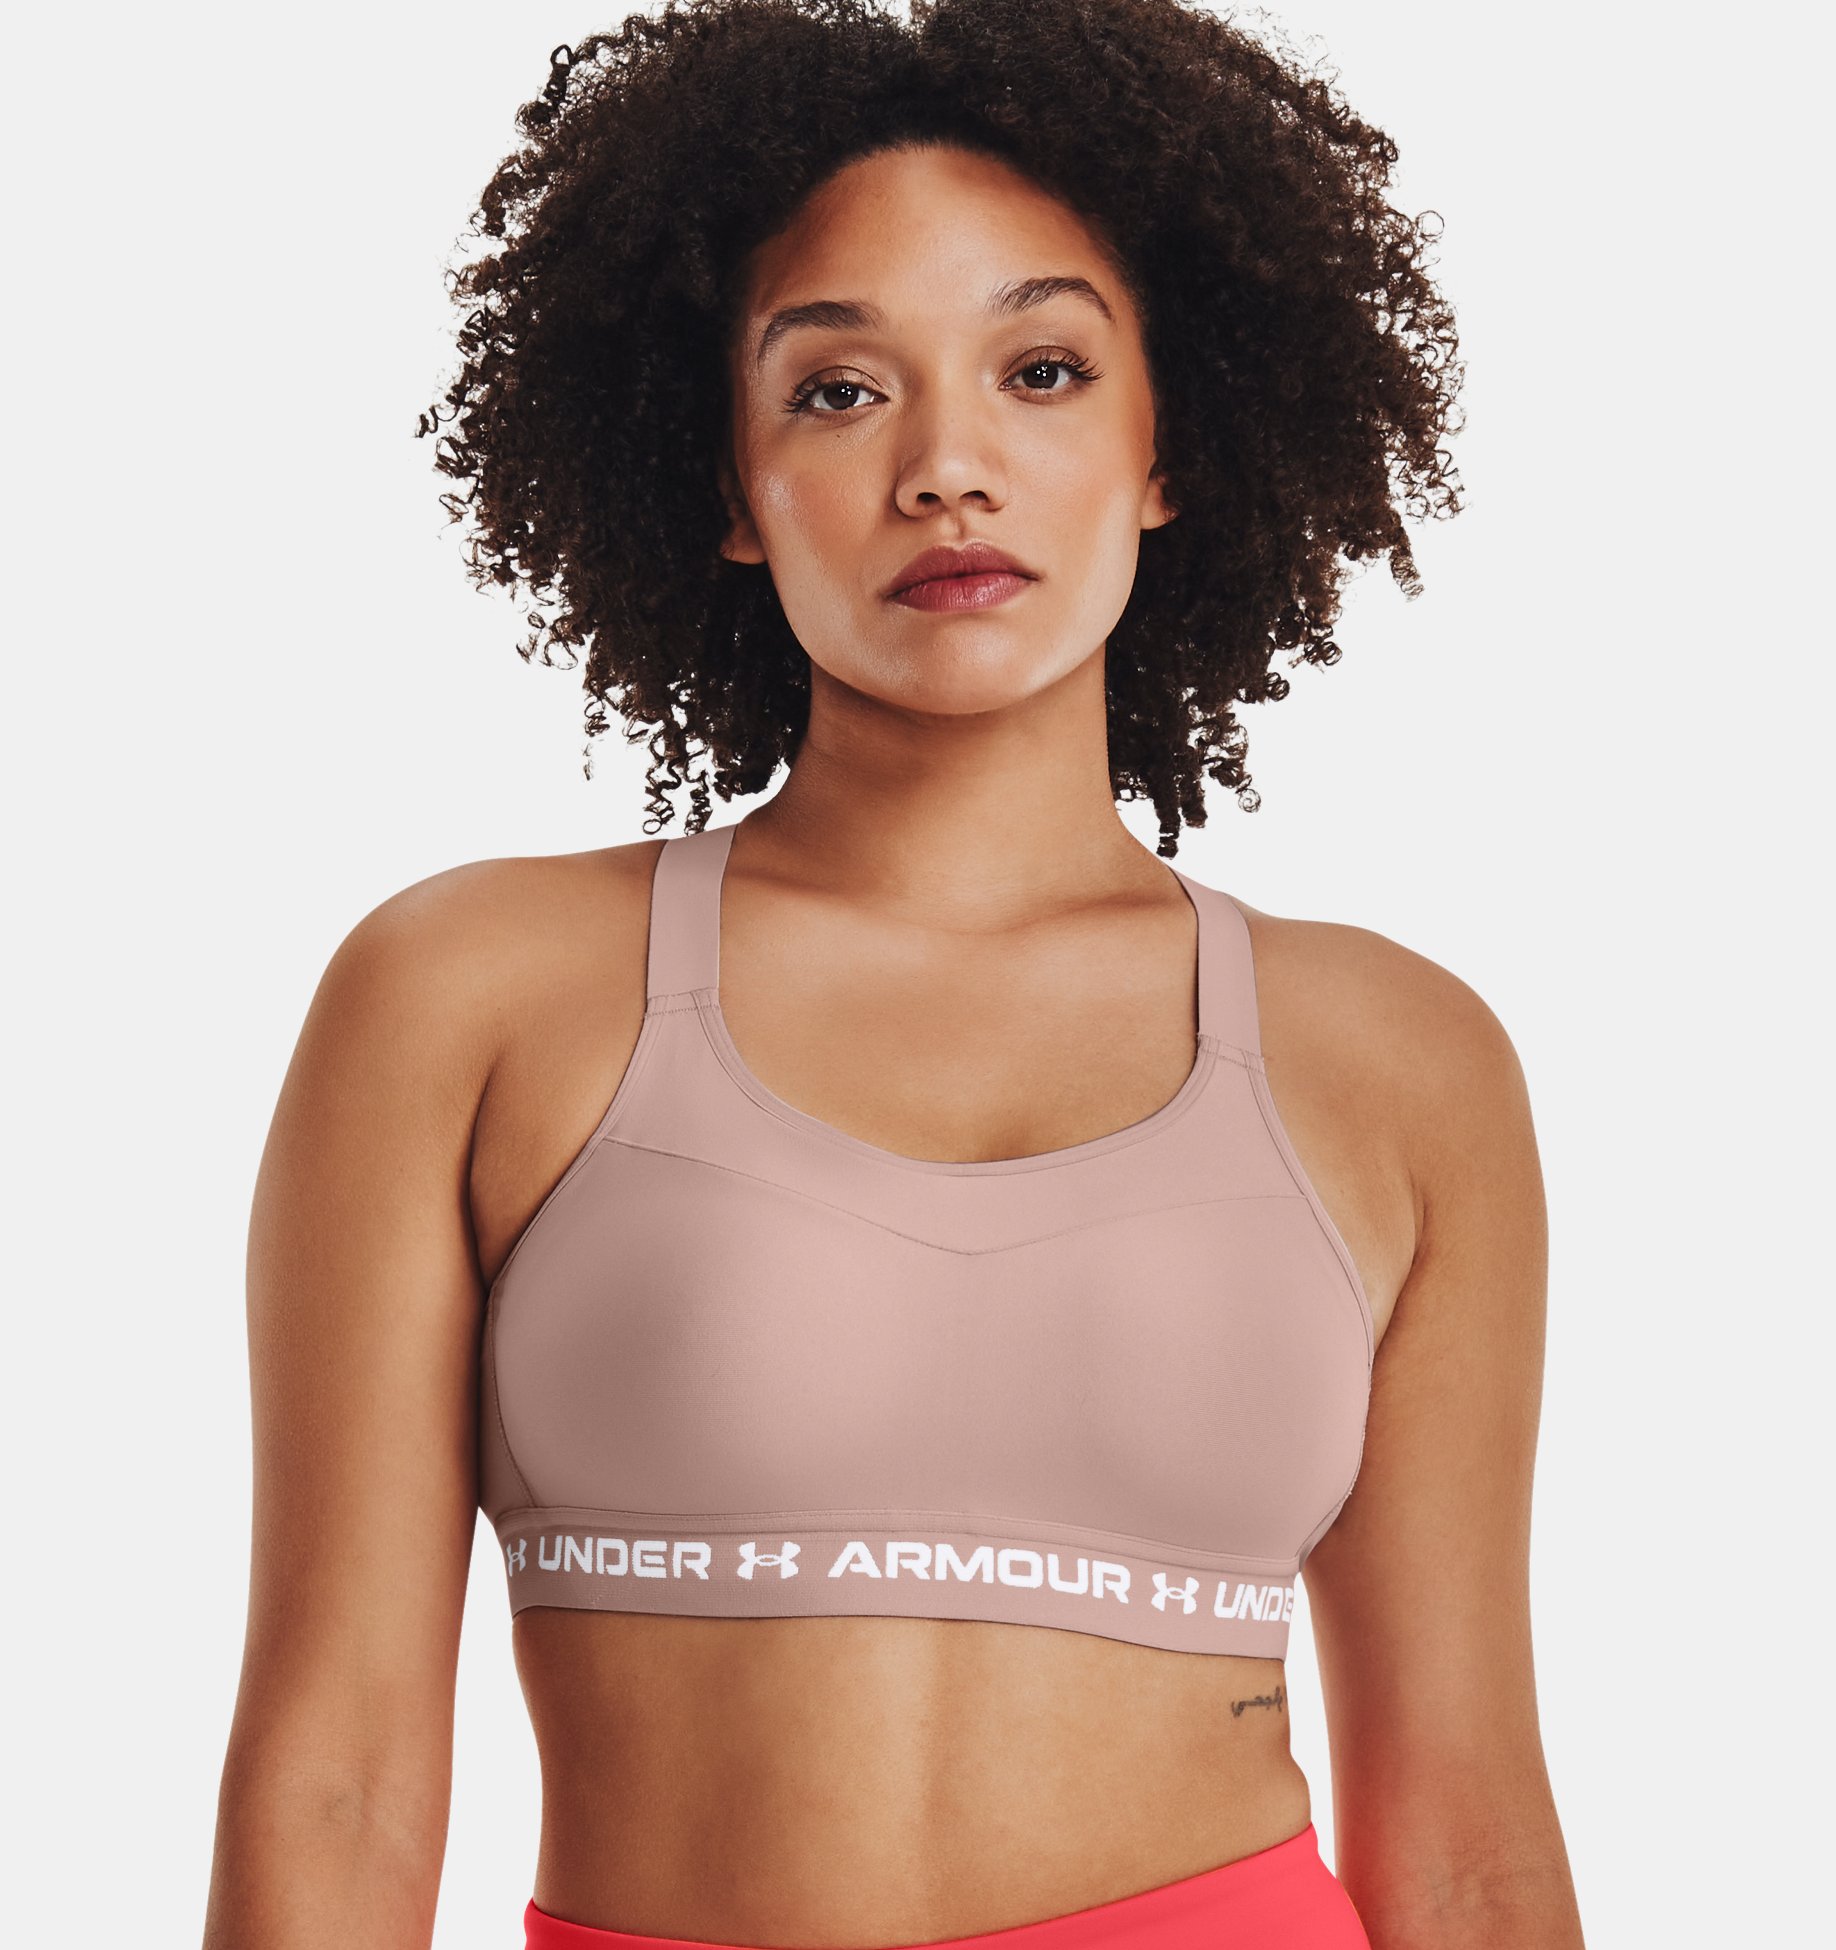 Under Armour NWT Youth Girls Sports Bra Workout Athletic Size S M L XL 